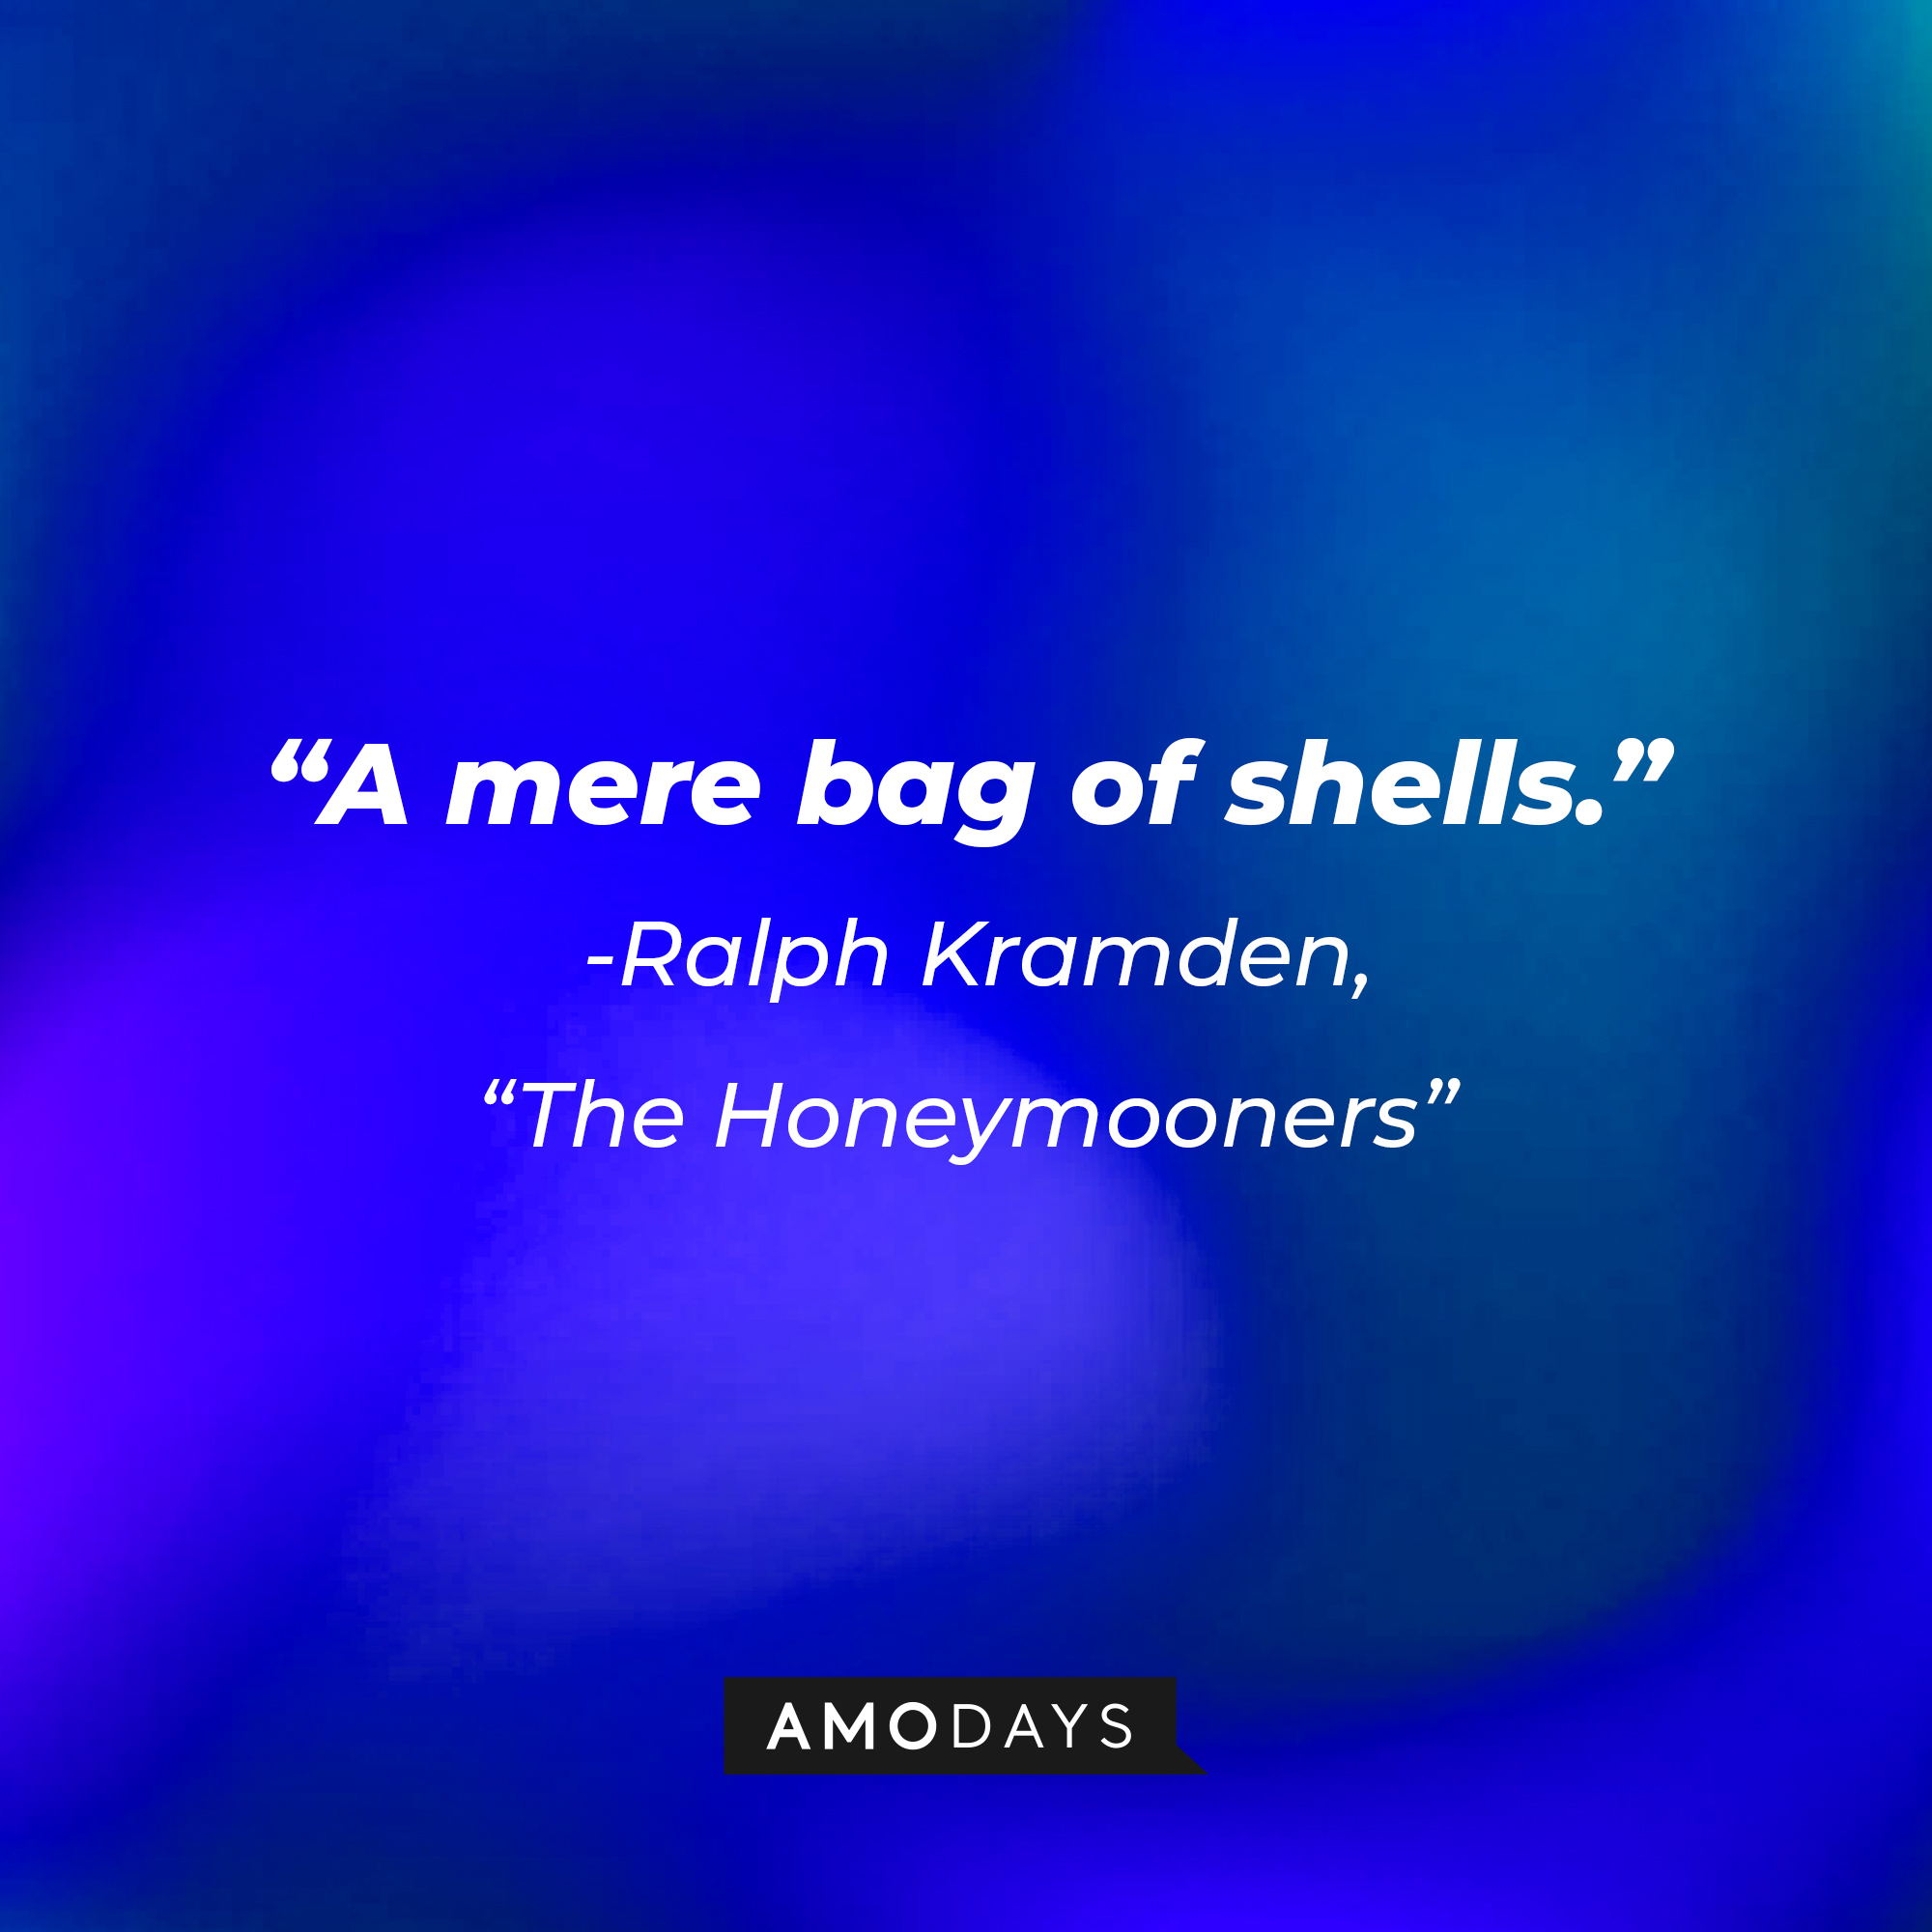 A quote from "The Honeymooners" star Ralph Kramden: "A mere bag of shells." | Source: AmoDays